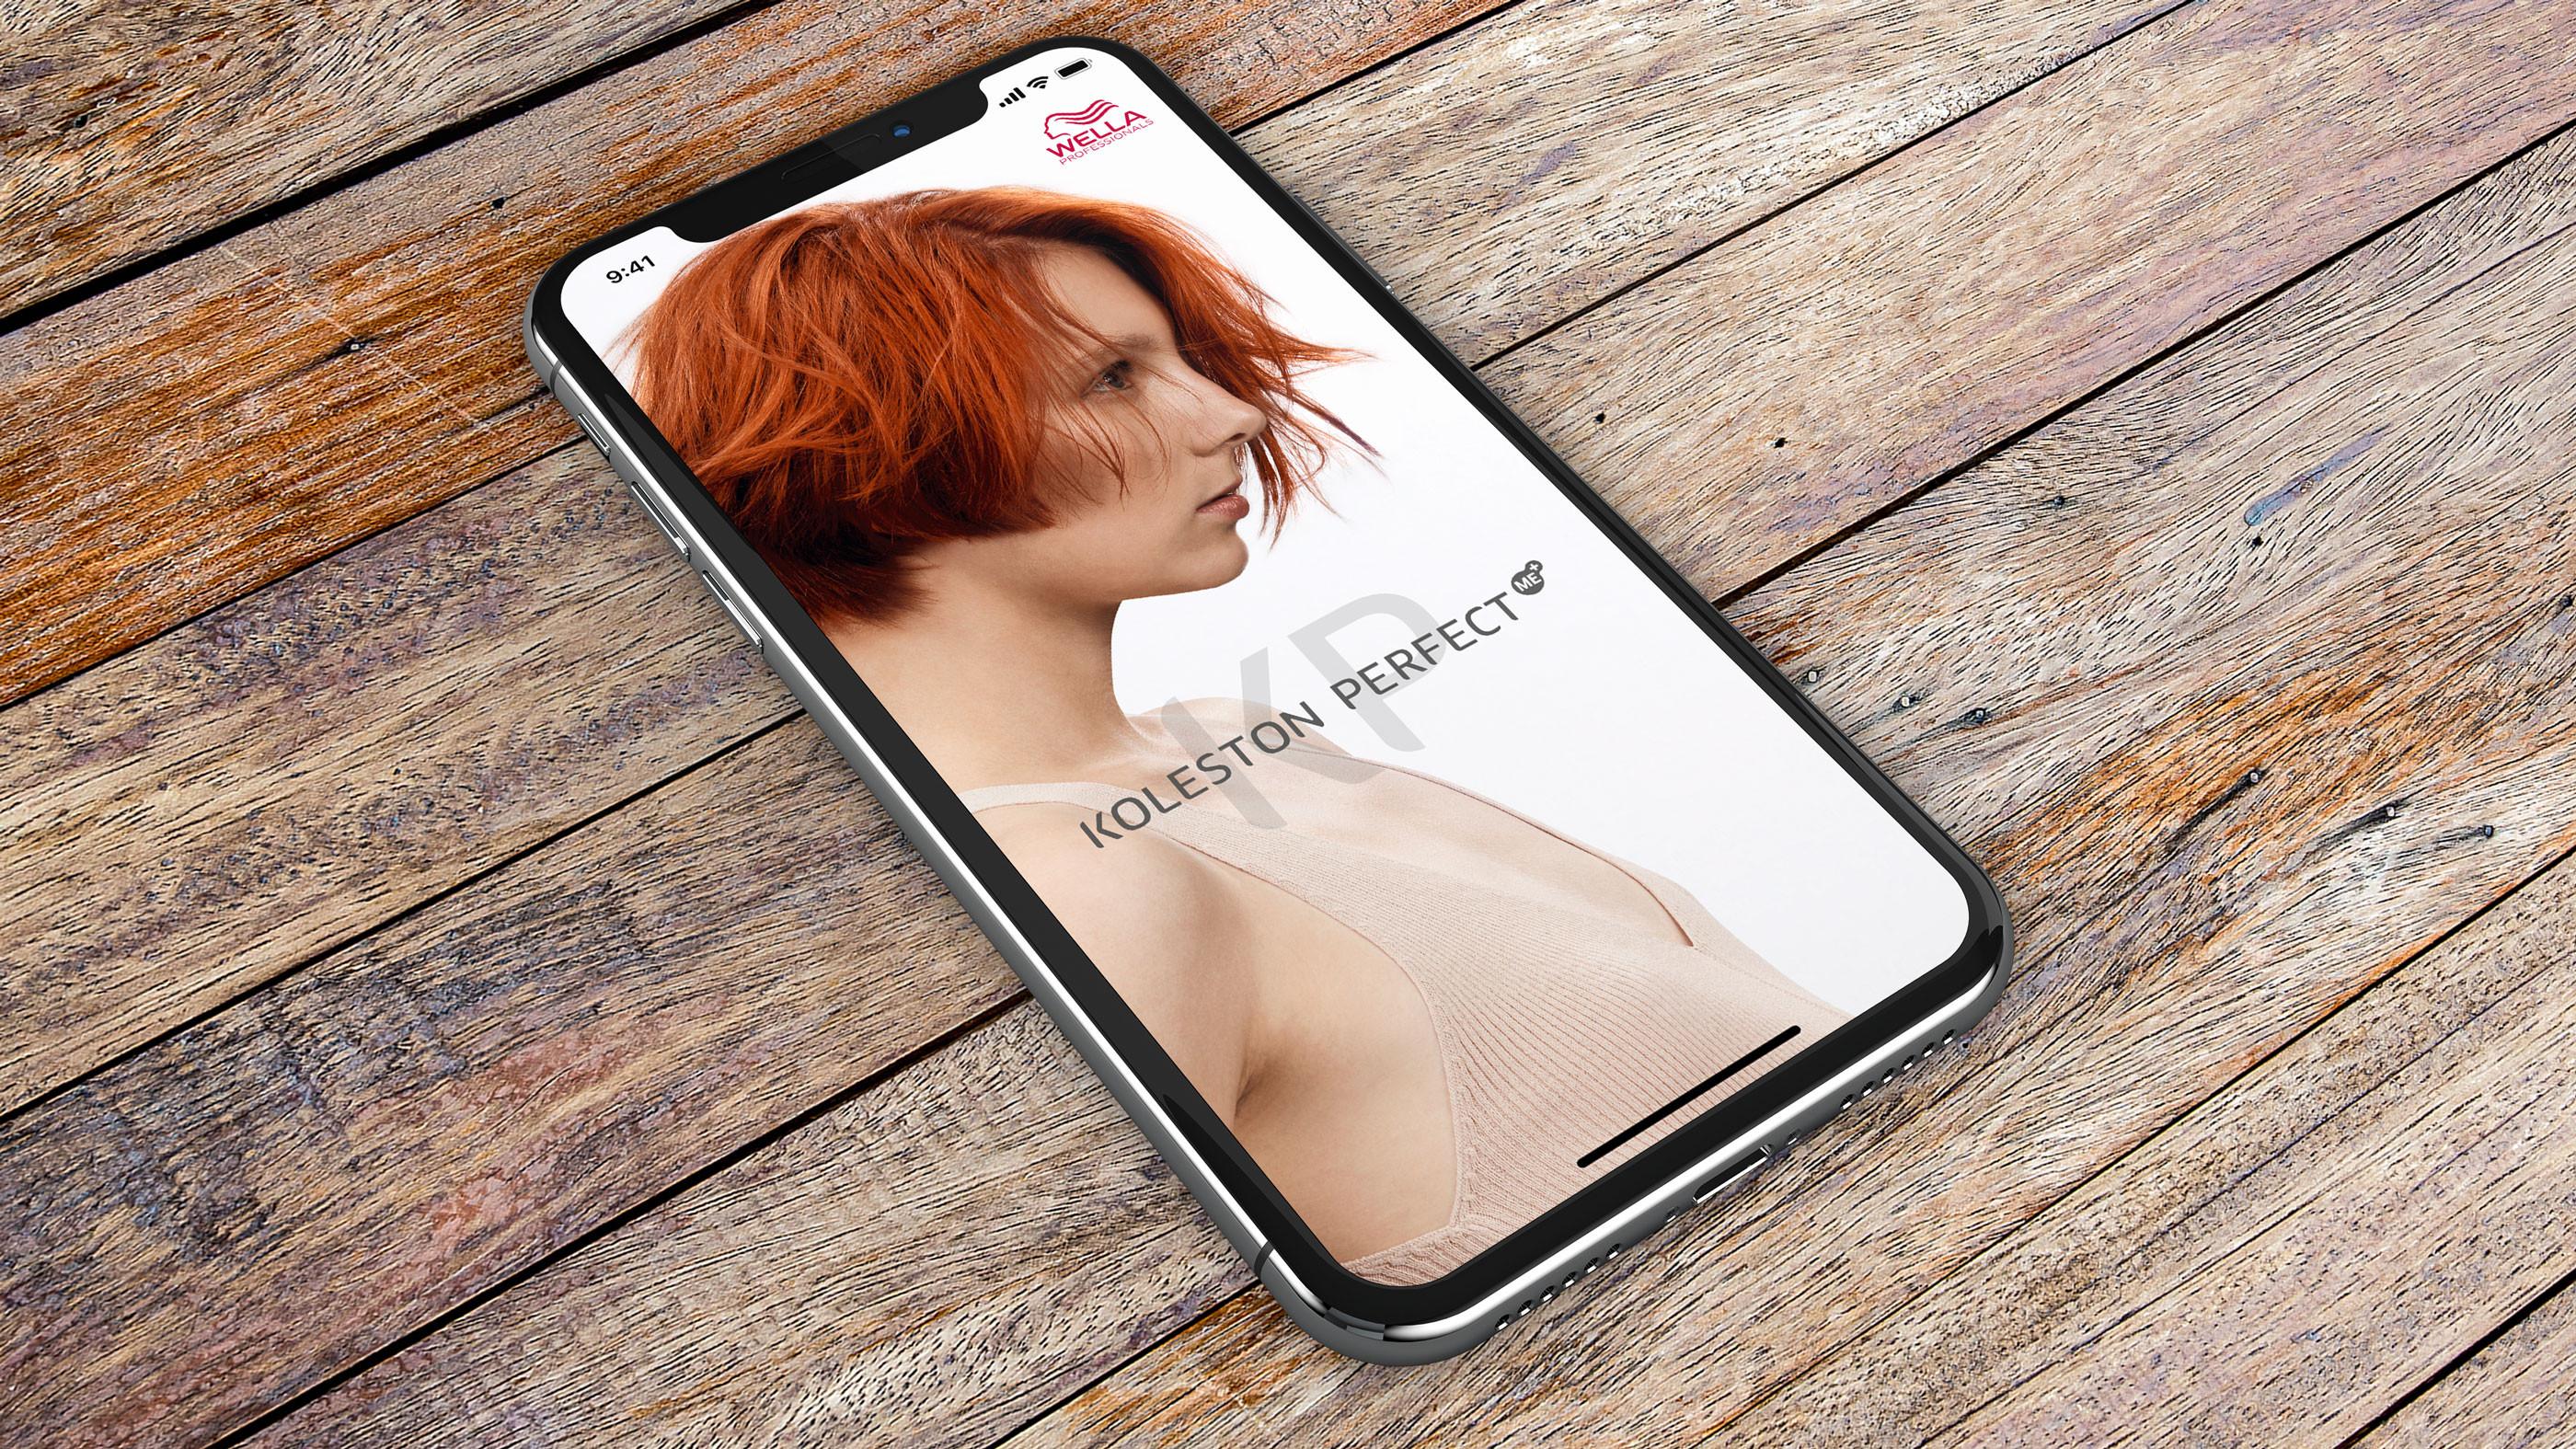 Wella Professionals app on an iPhone